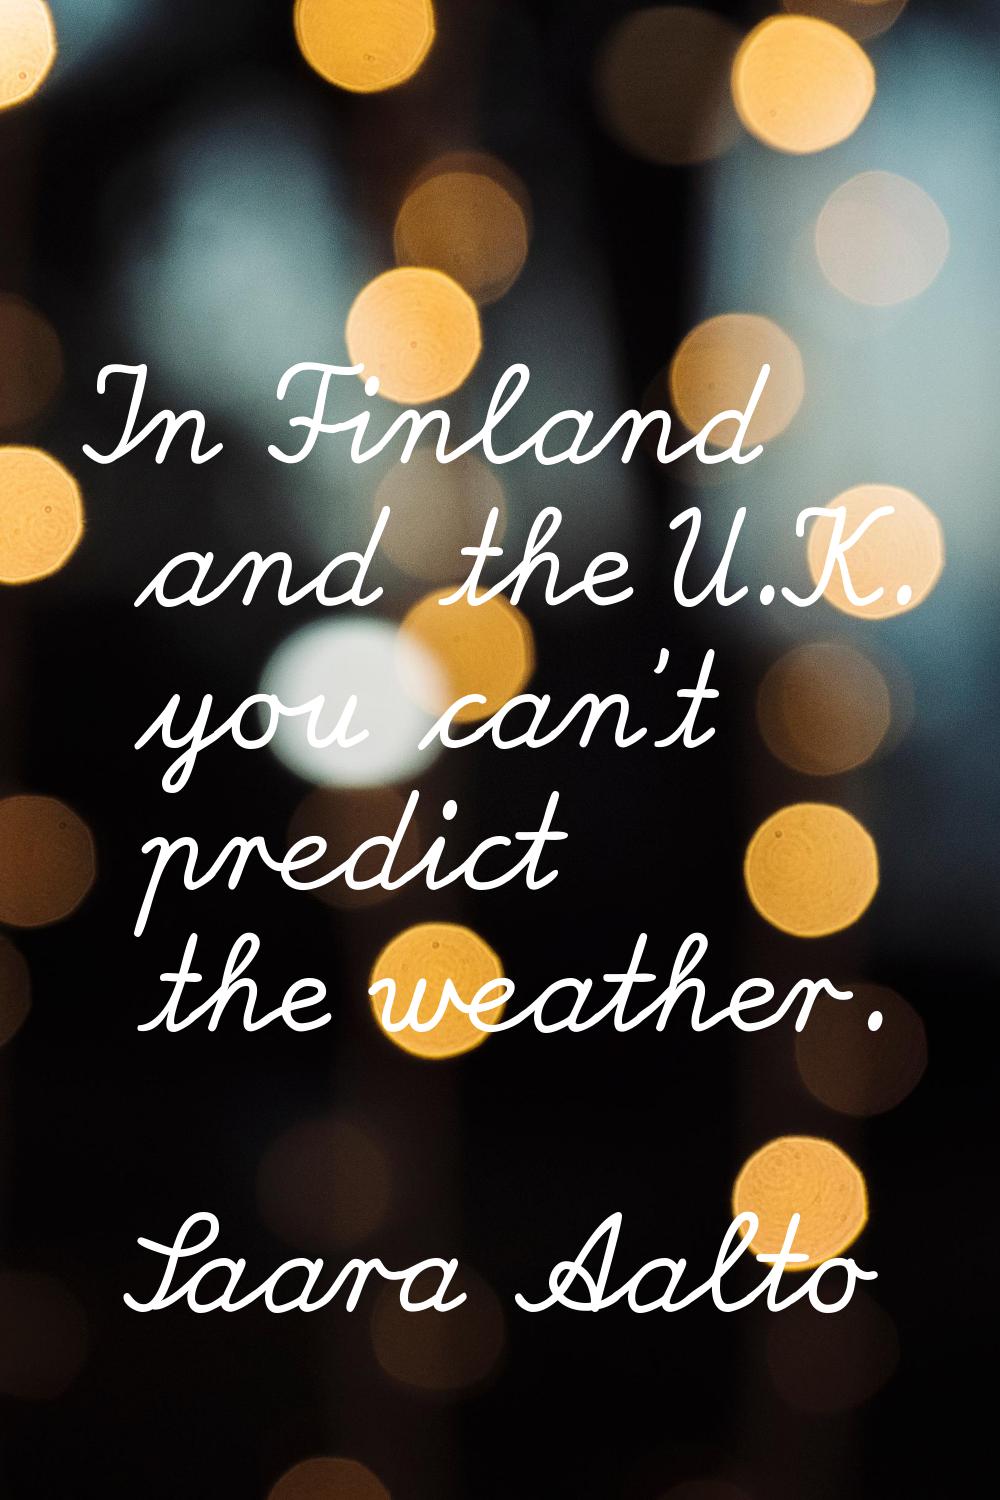 In Finland and the U.K. you can't predict the weather.